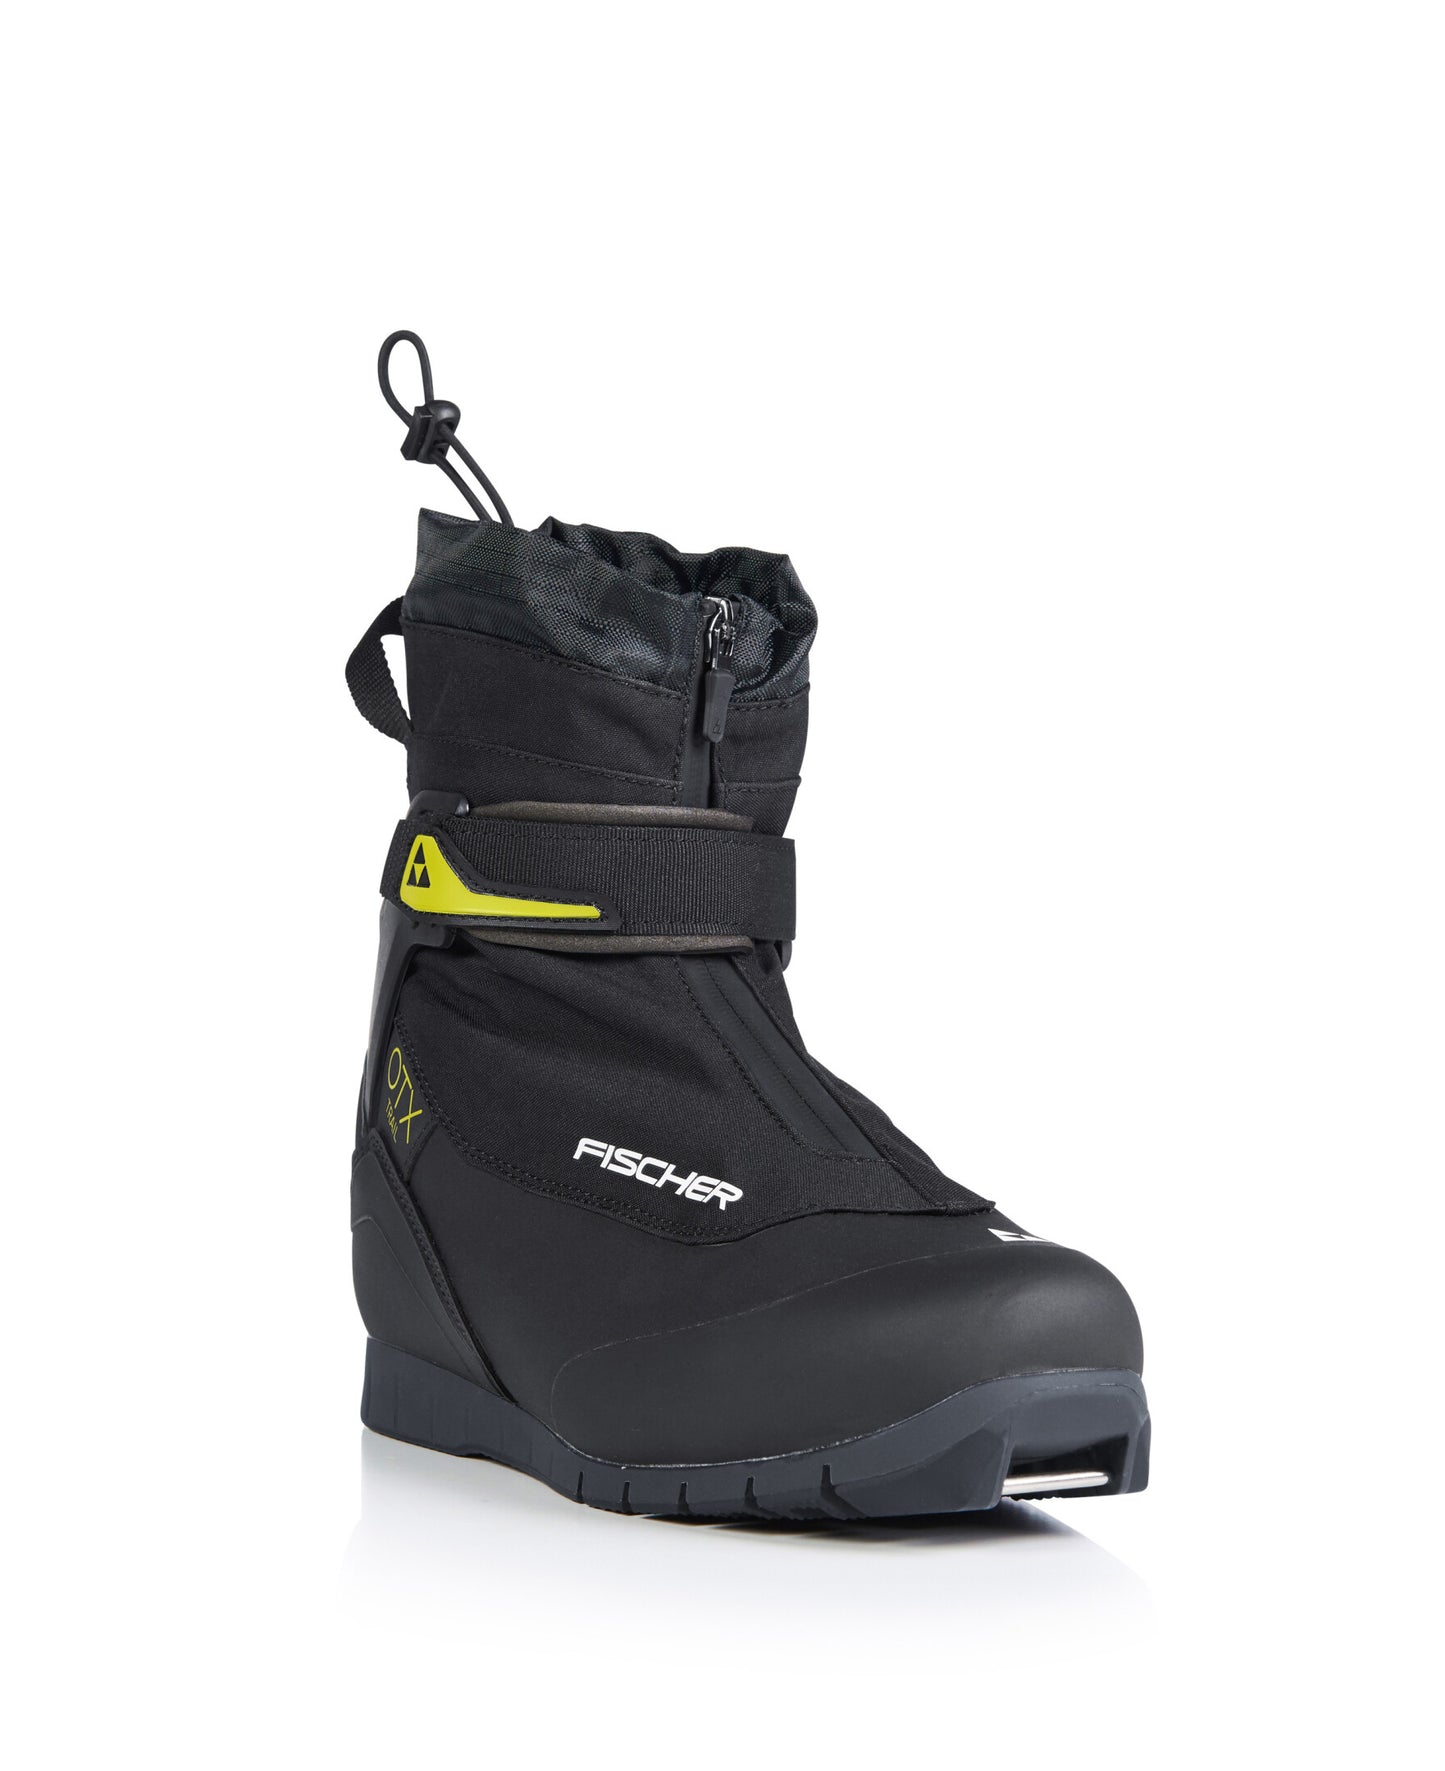 Load image into Gallery viewer, Fischer OTX Trail Cross-Country Ski Boots
